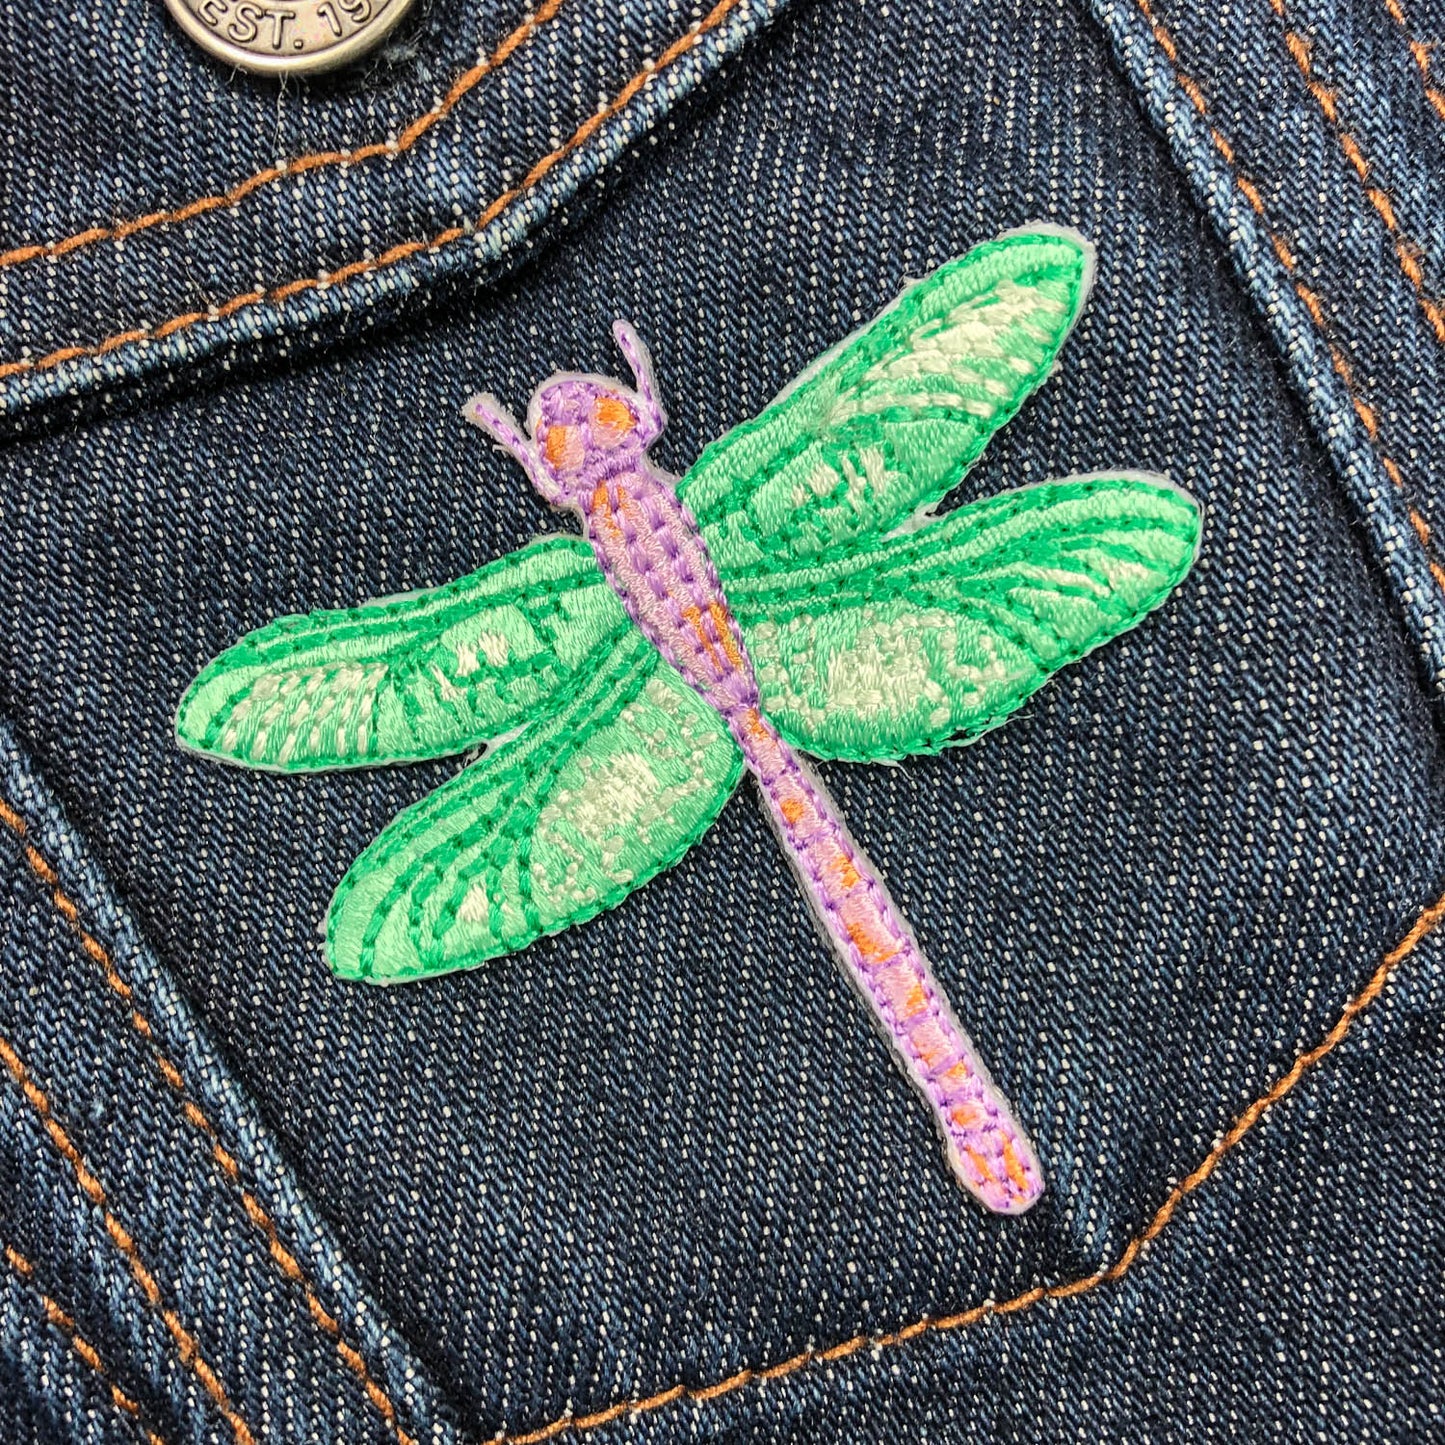 Insects Patches (3 pieces)